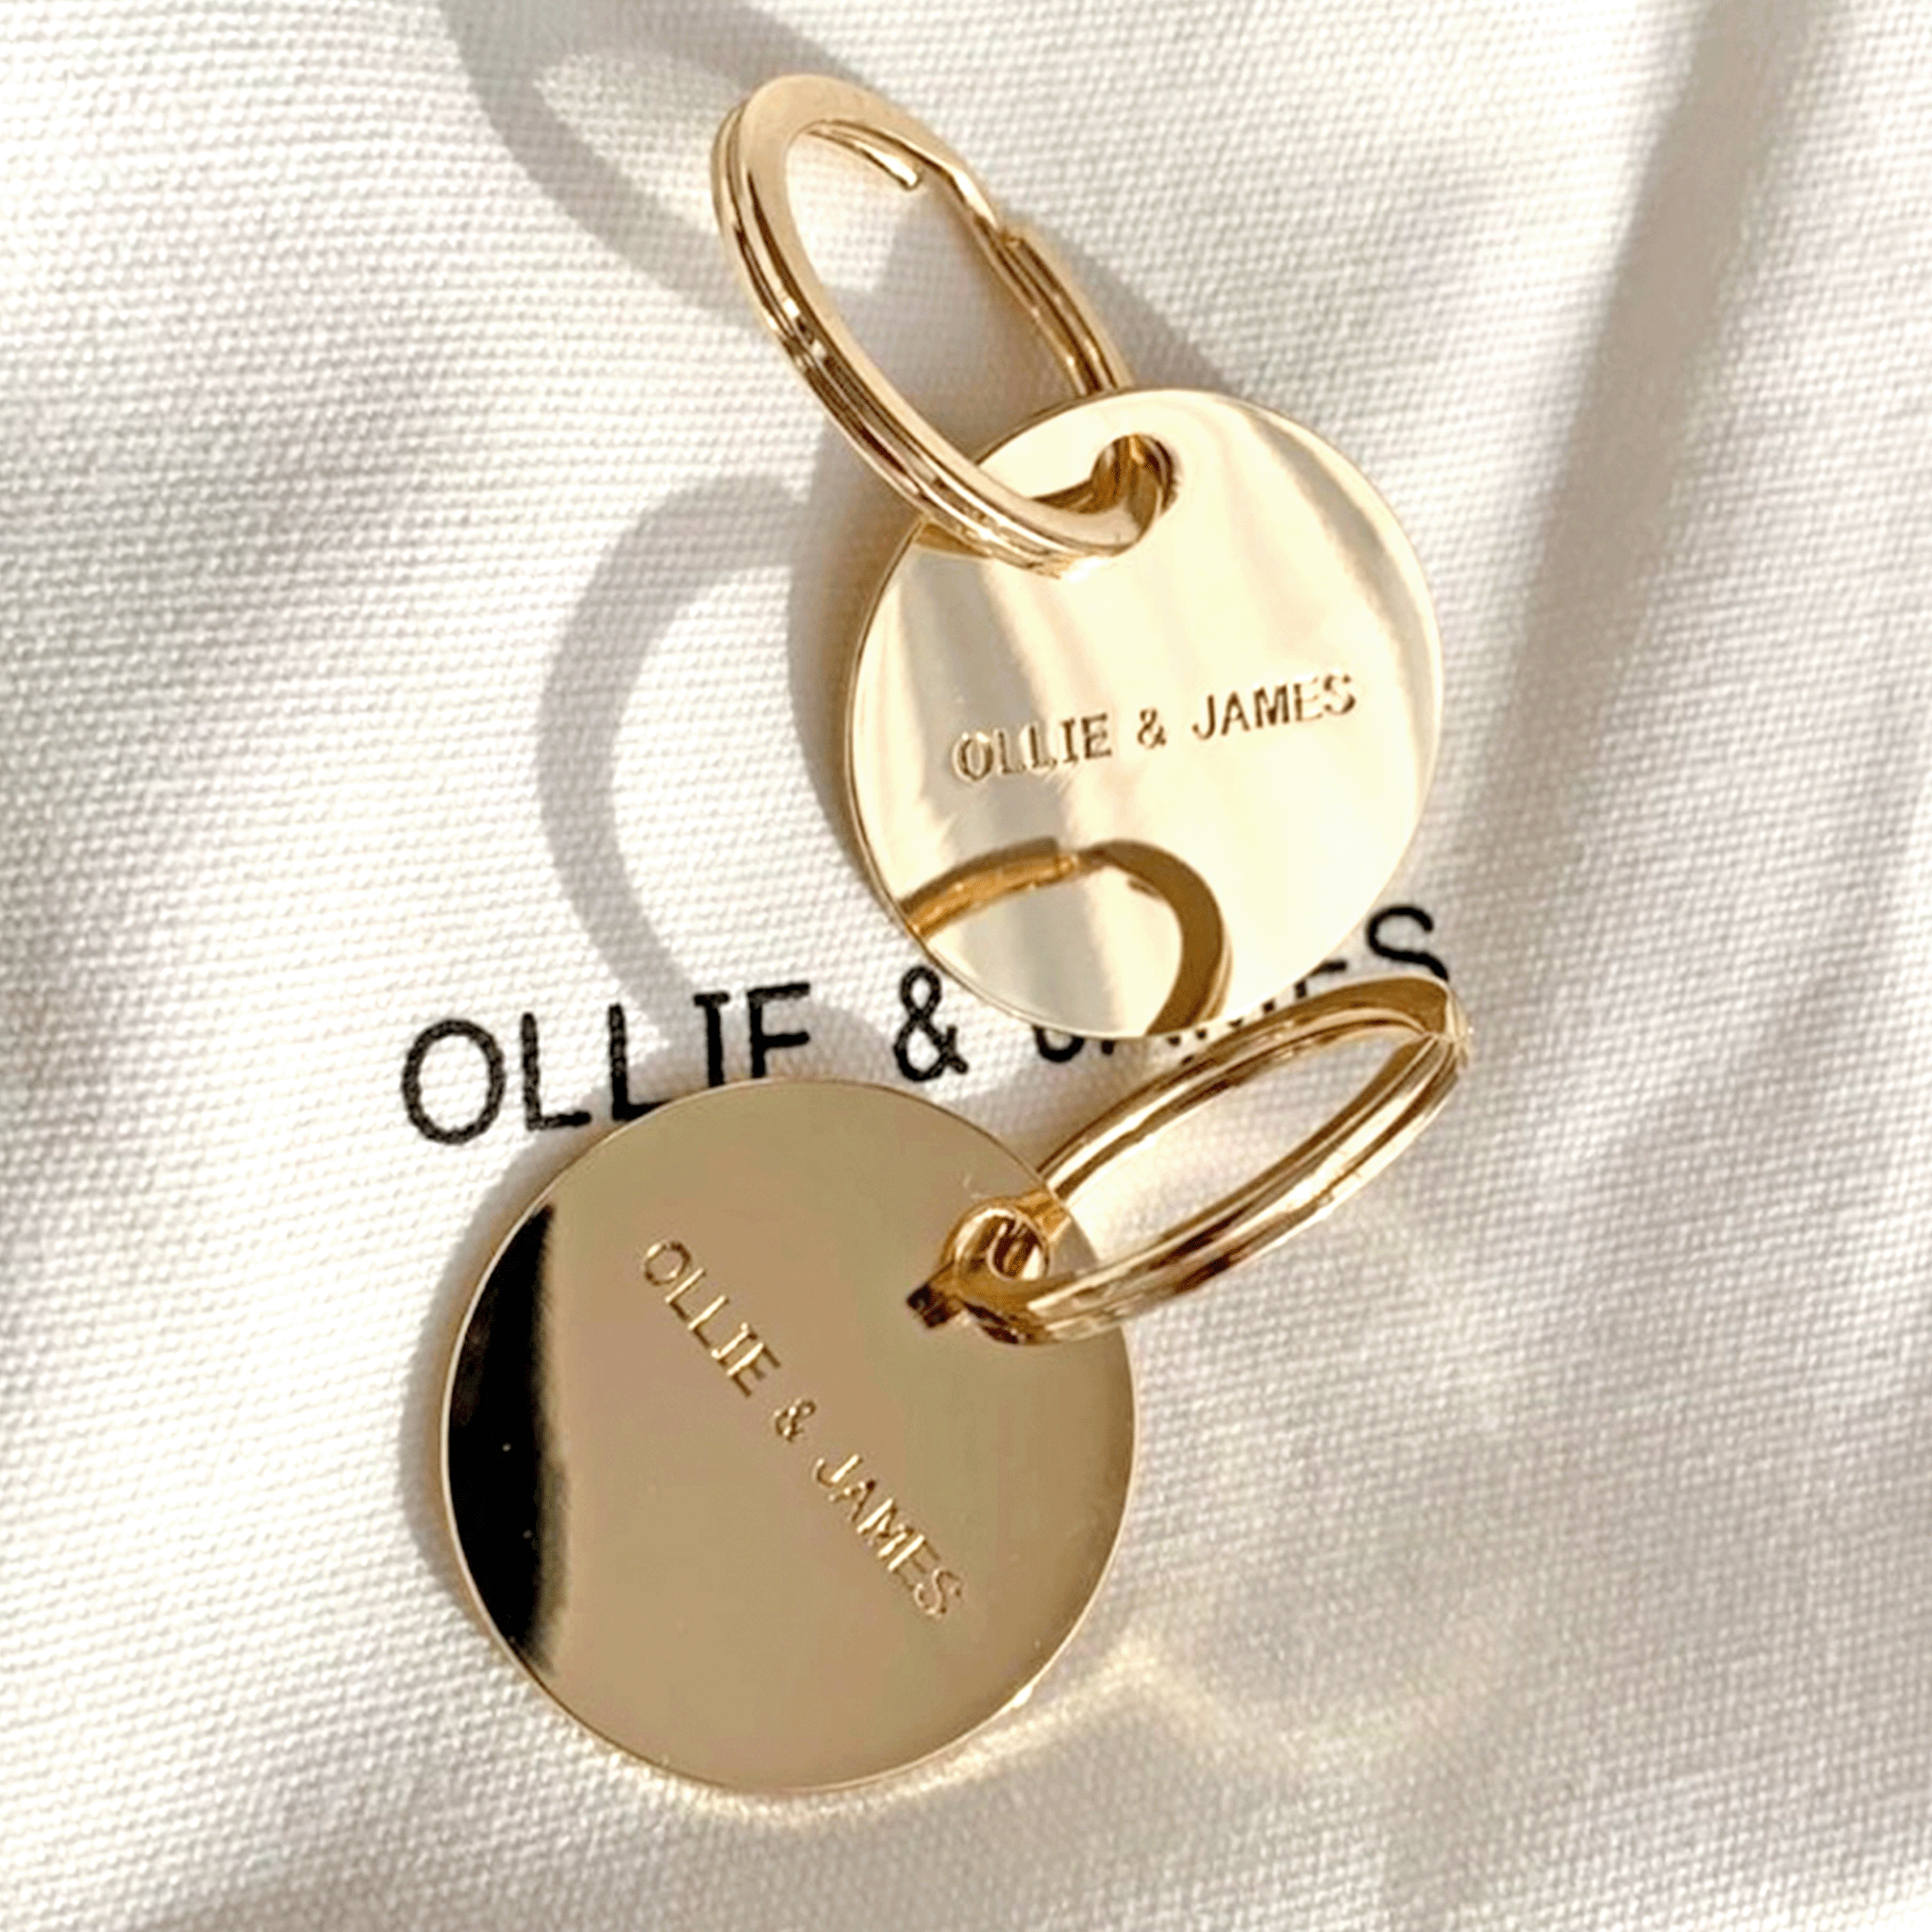 Dog Name Tags - Gold - Engraved - OLLIE & JAMES